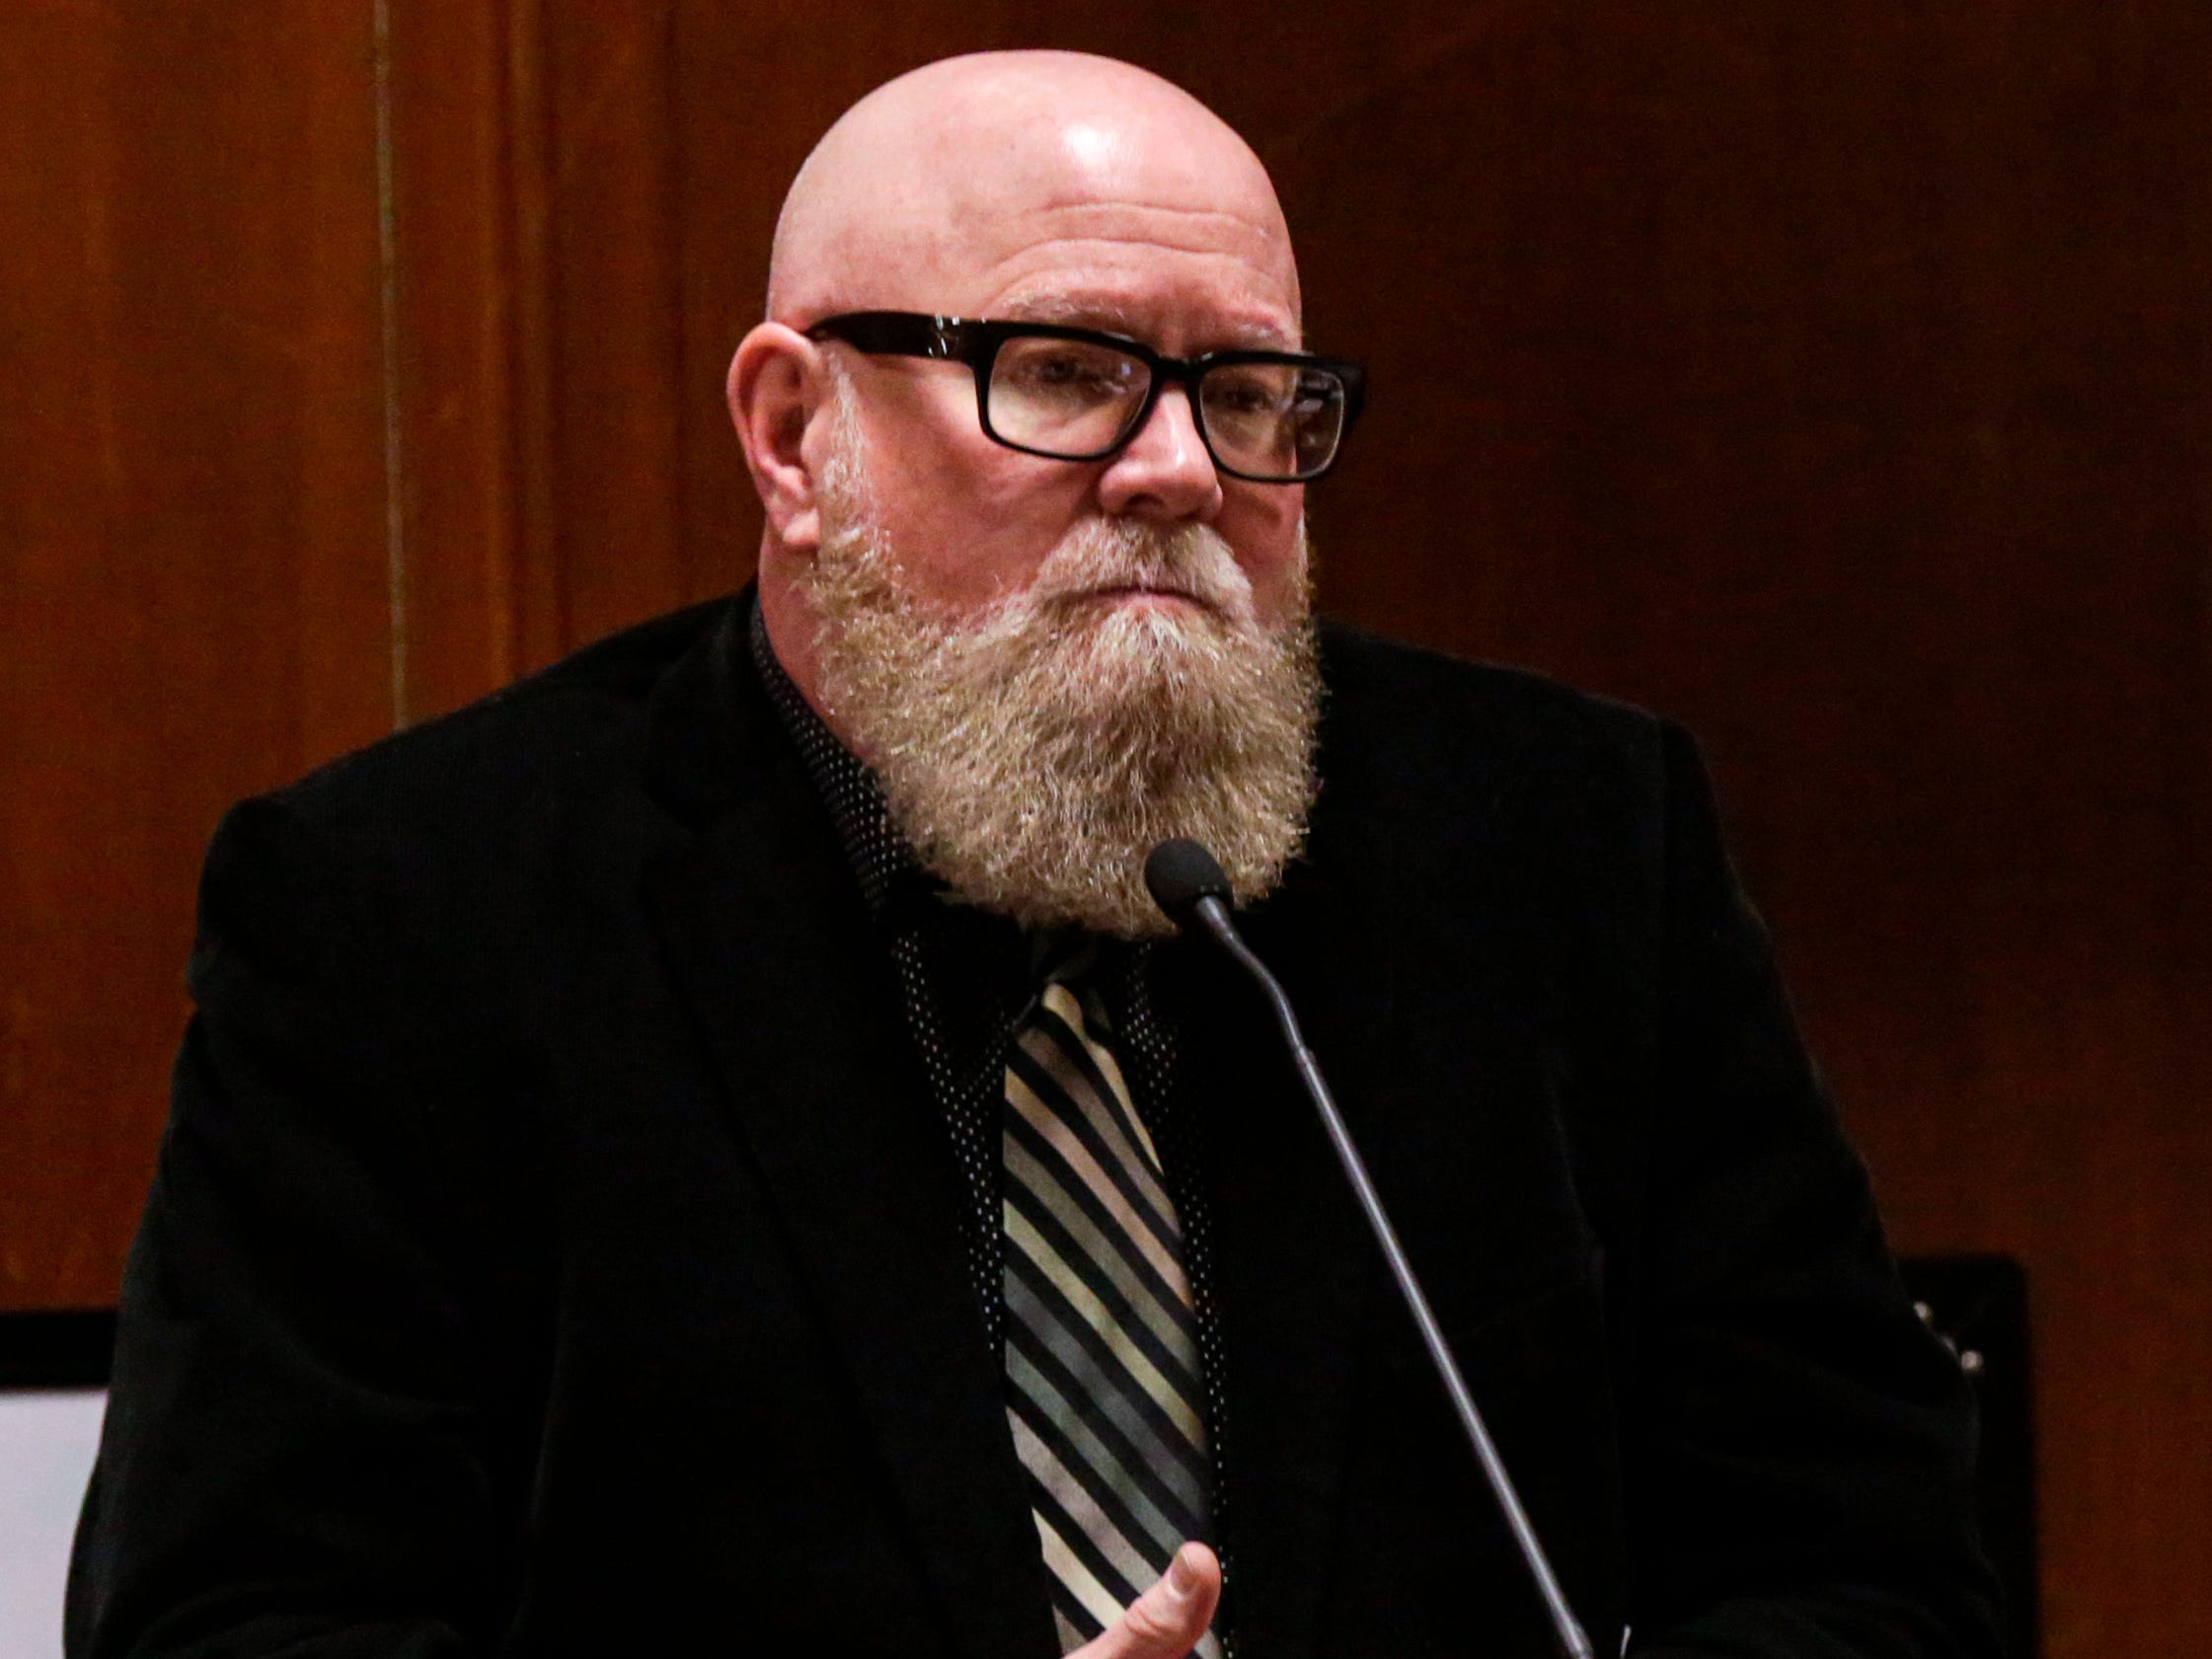 Witness Tracy Price testifies on the stand during Jerry Burns' trial at the Scott County Courthouse in Davenport on Wednesday, Feb. 12, 2020. Price attended school with Michelle Martinko and was with her at a choir banquet the night she was killed.